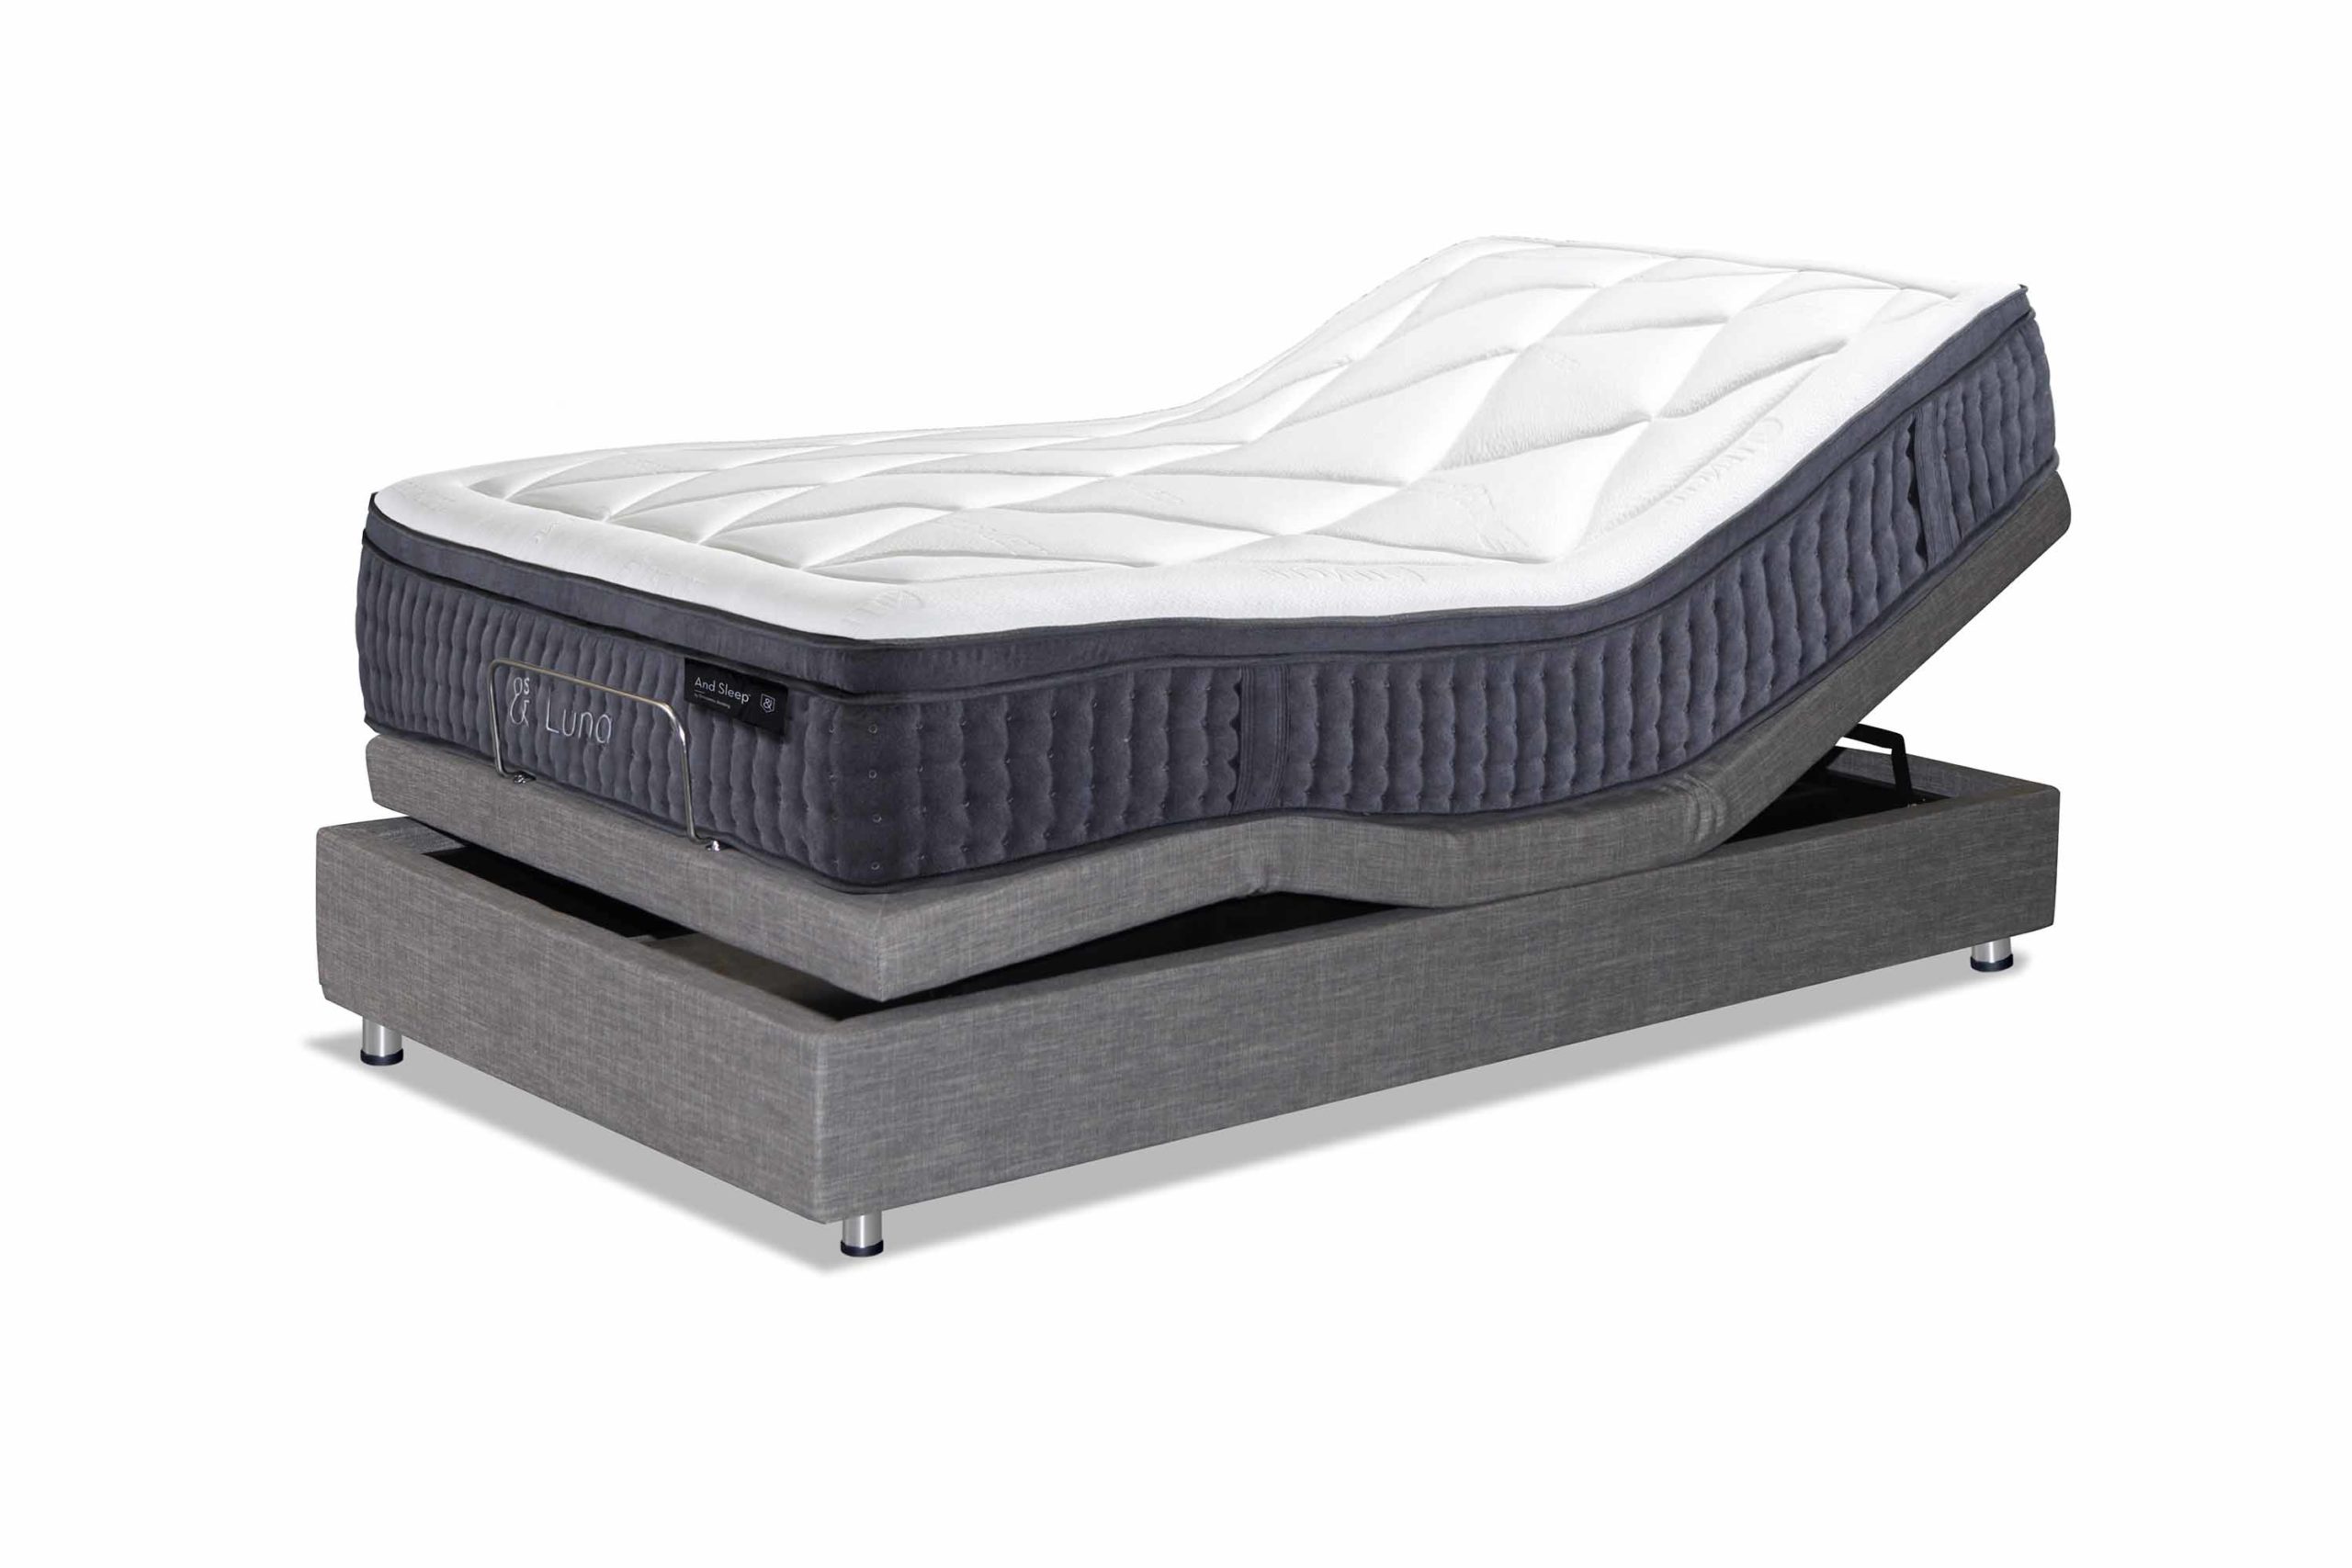 chiropedic-adjustable-electric-bed-scaled-1